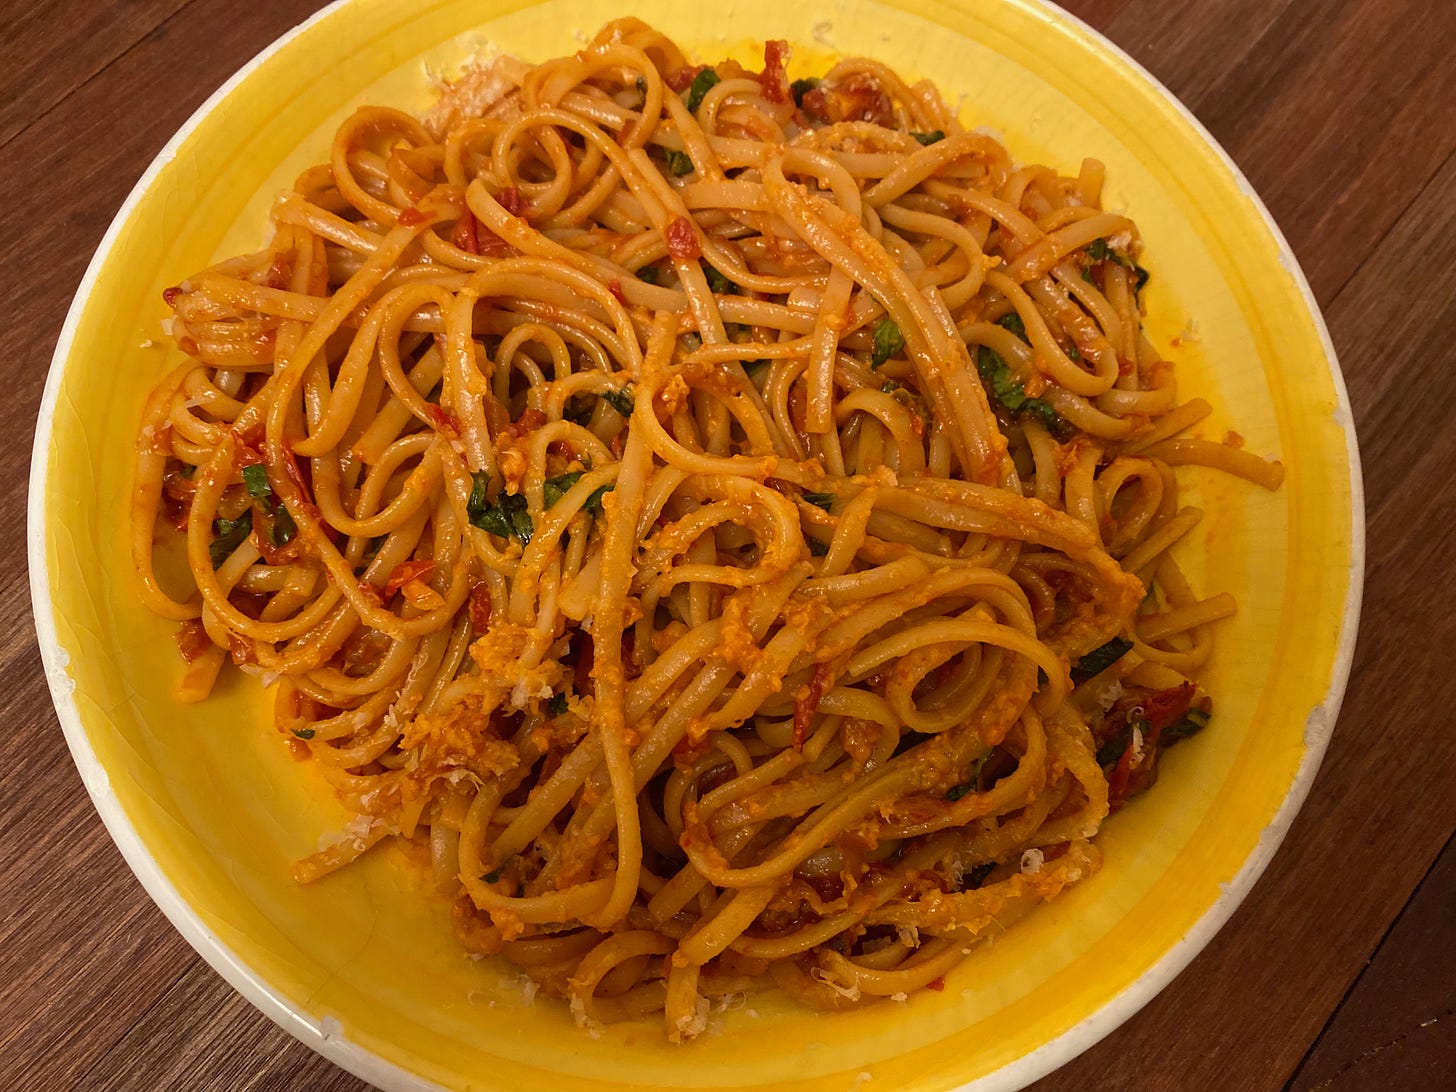 A shallow yellow bowl of linguine with tomato sauce.